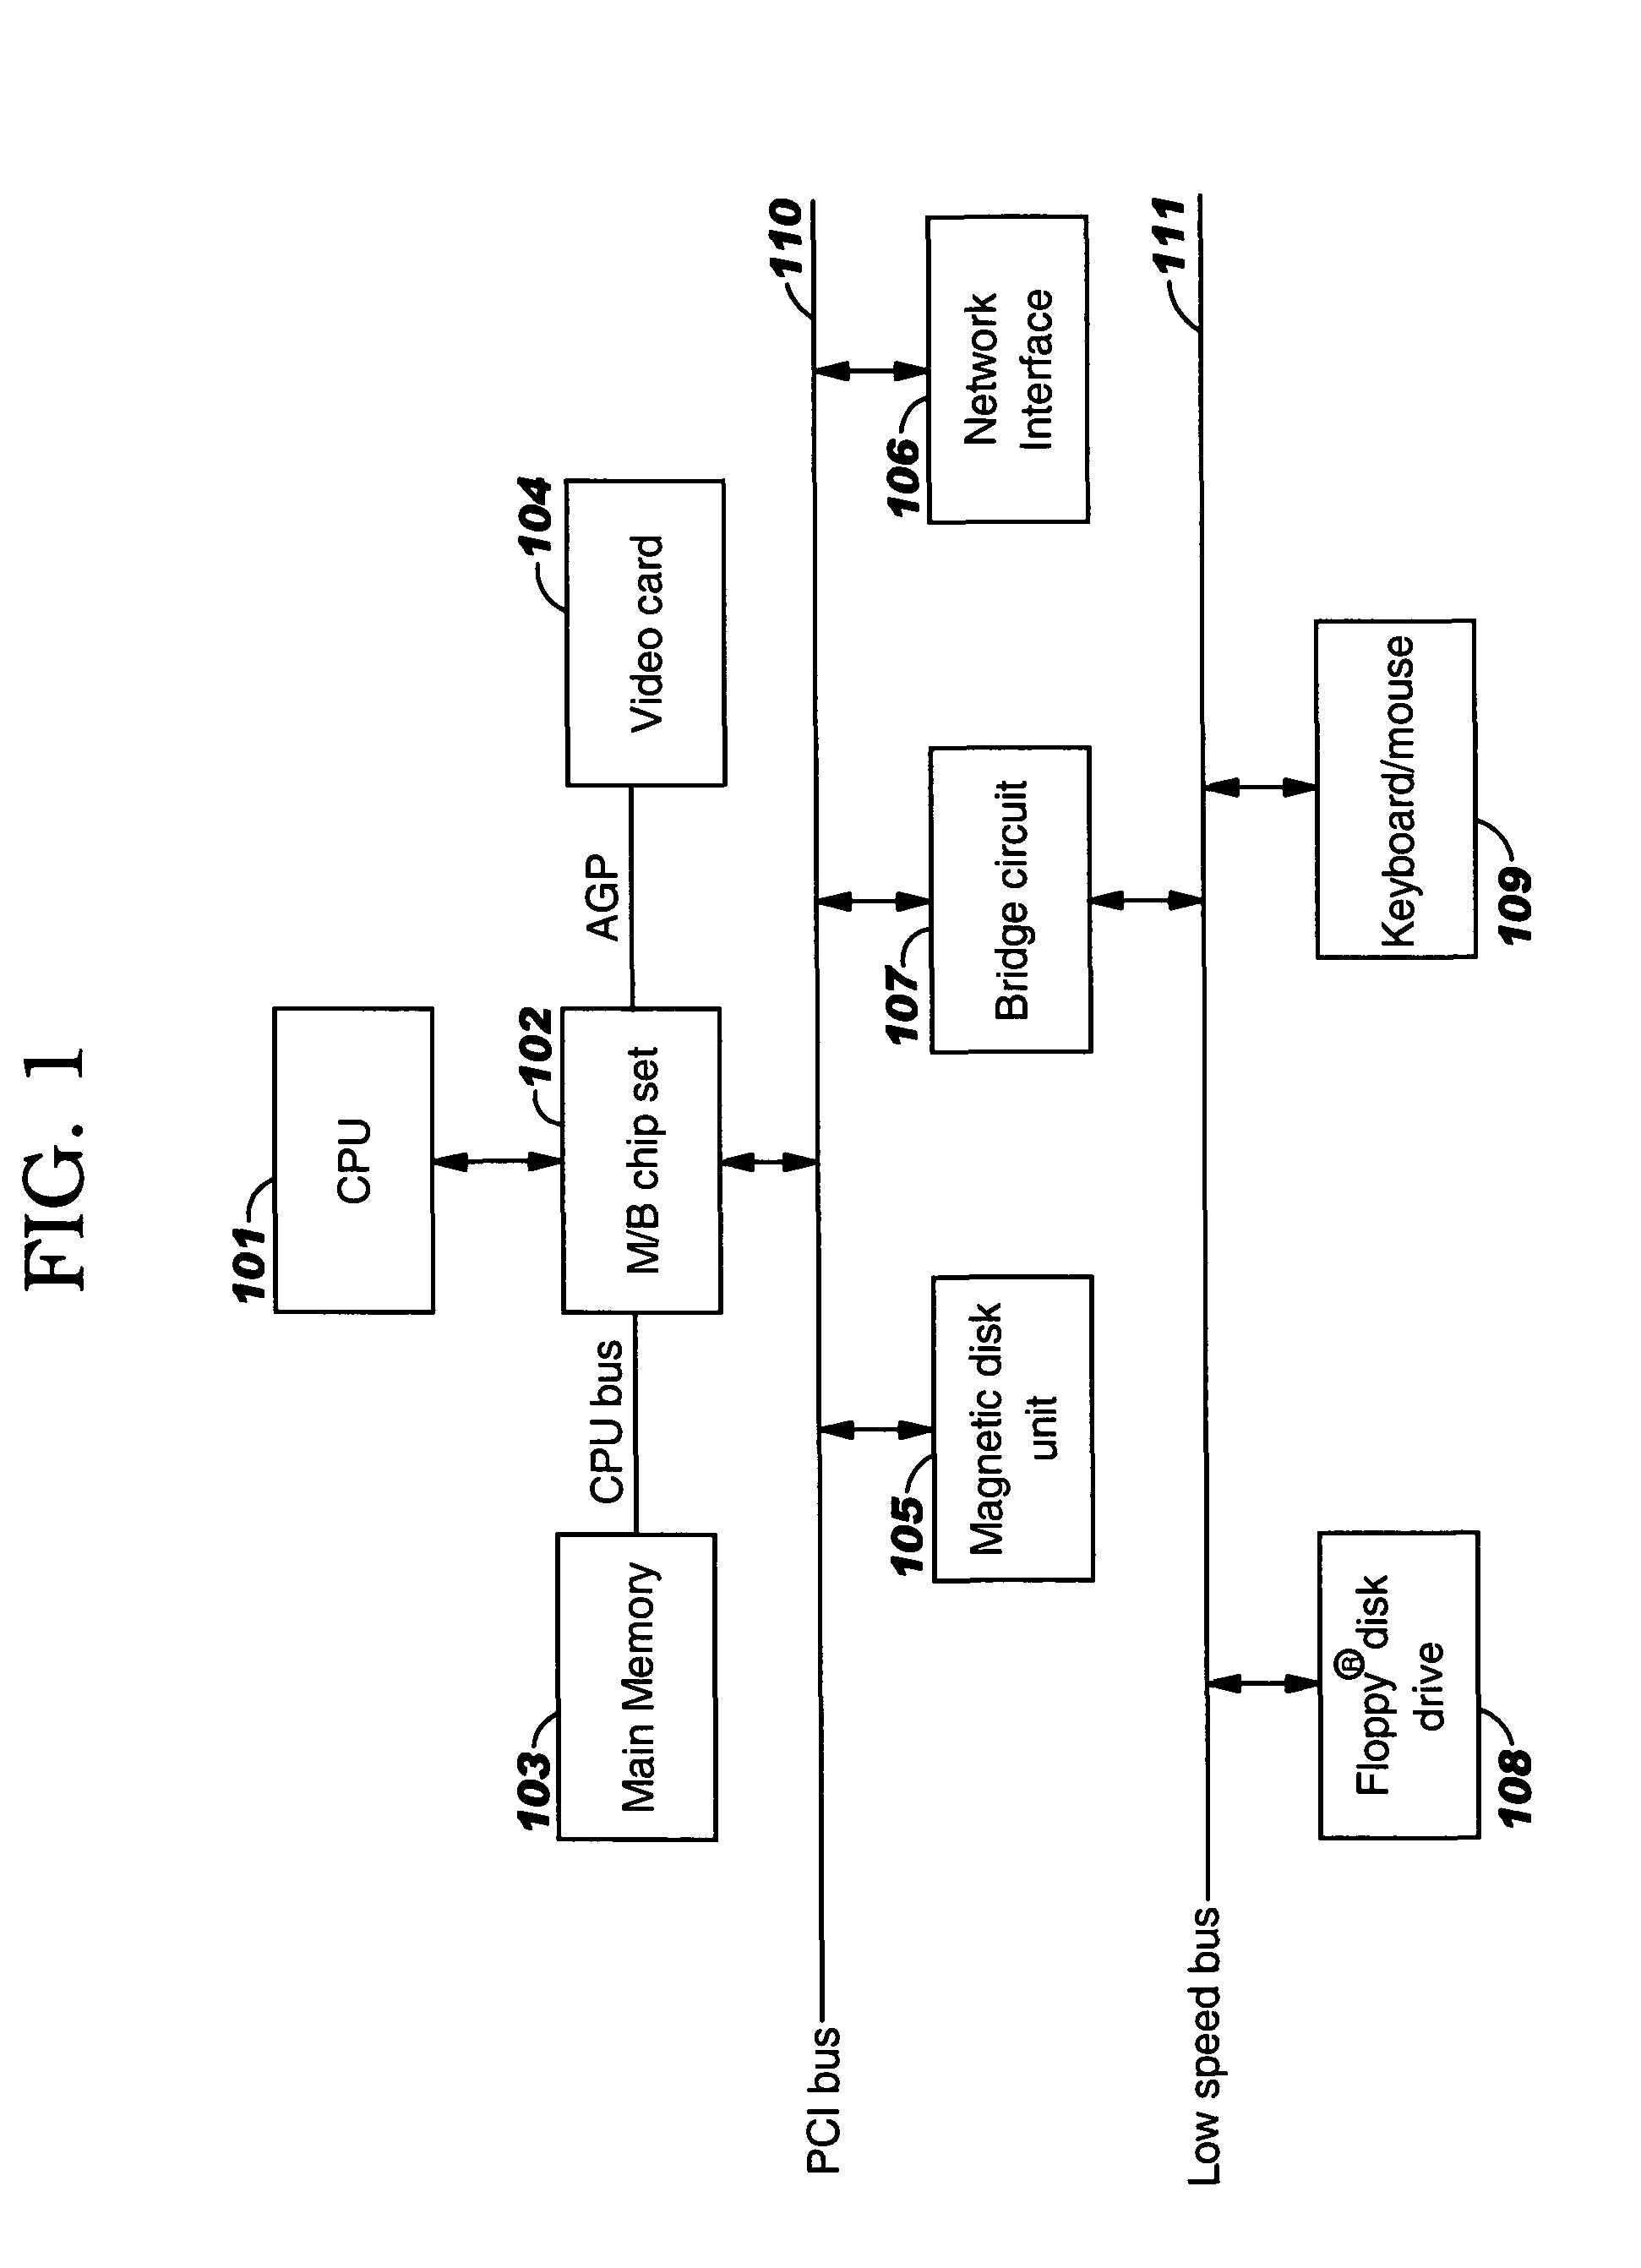 Apparatus and method for morphological analysis